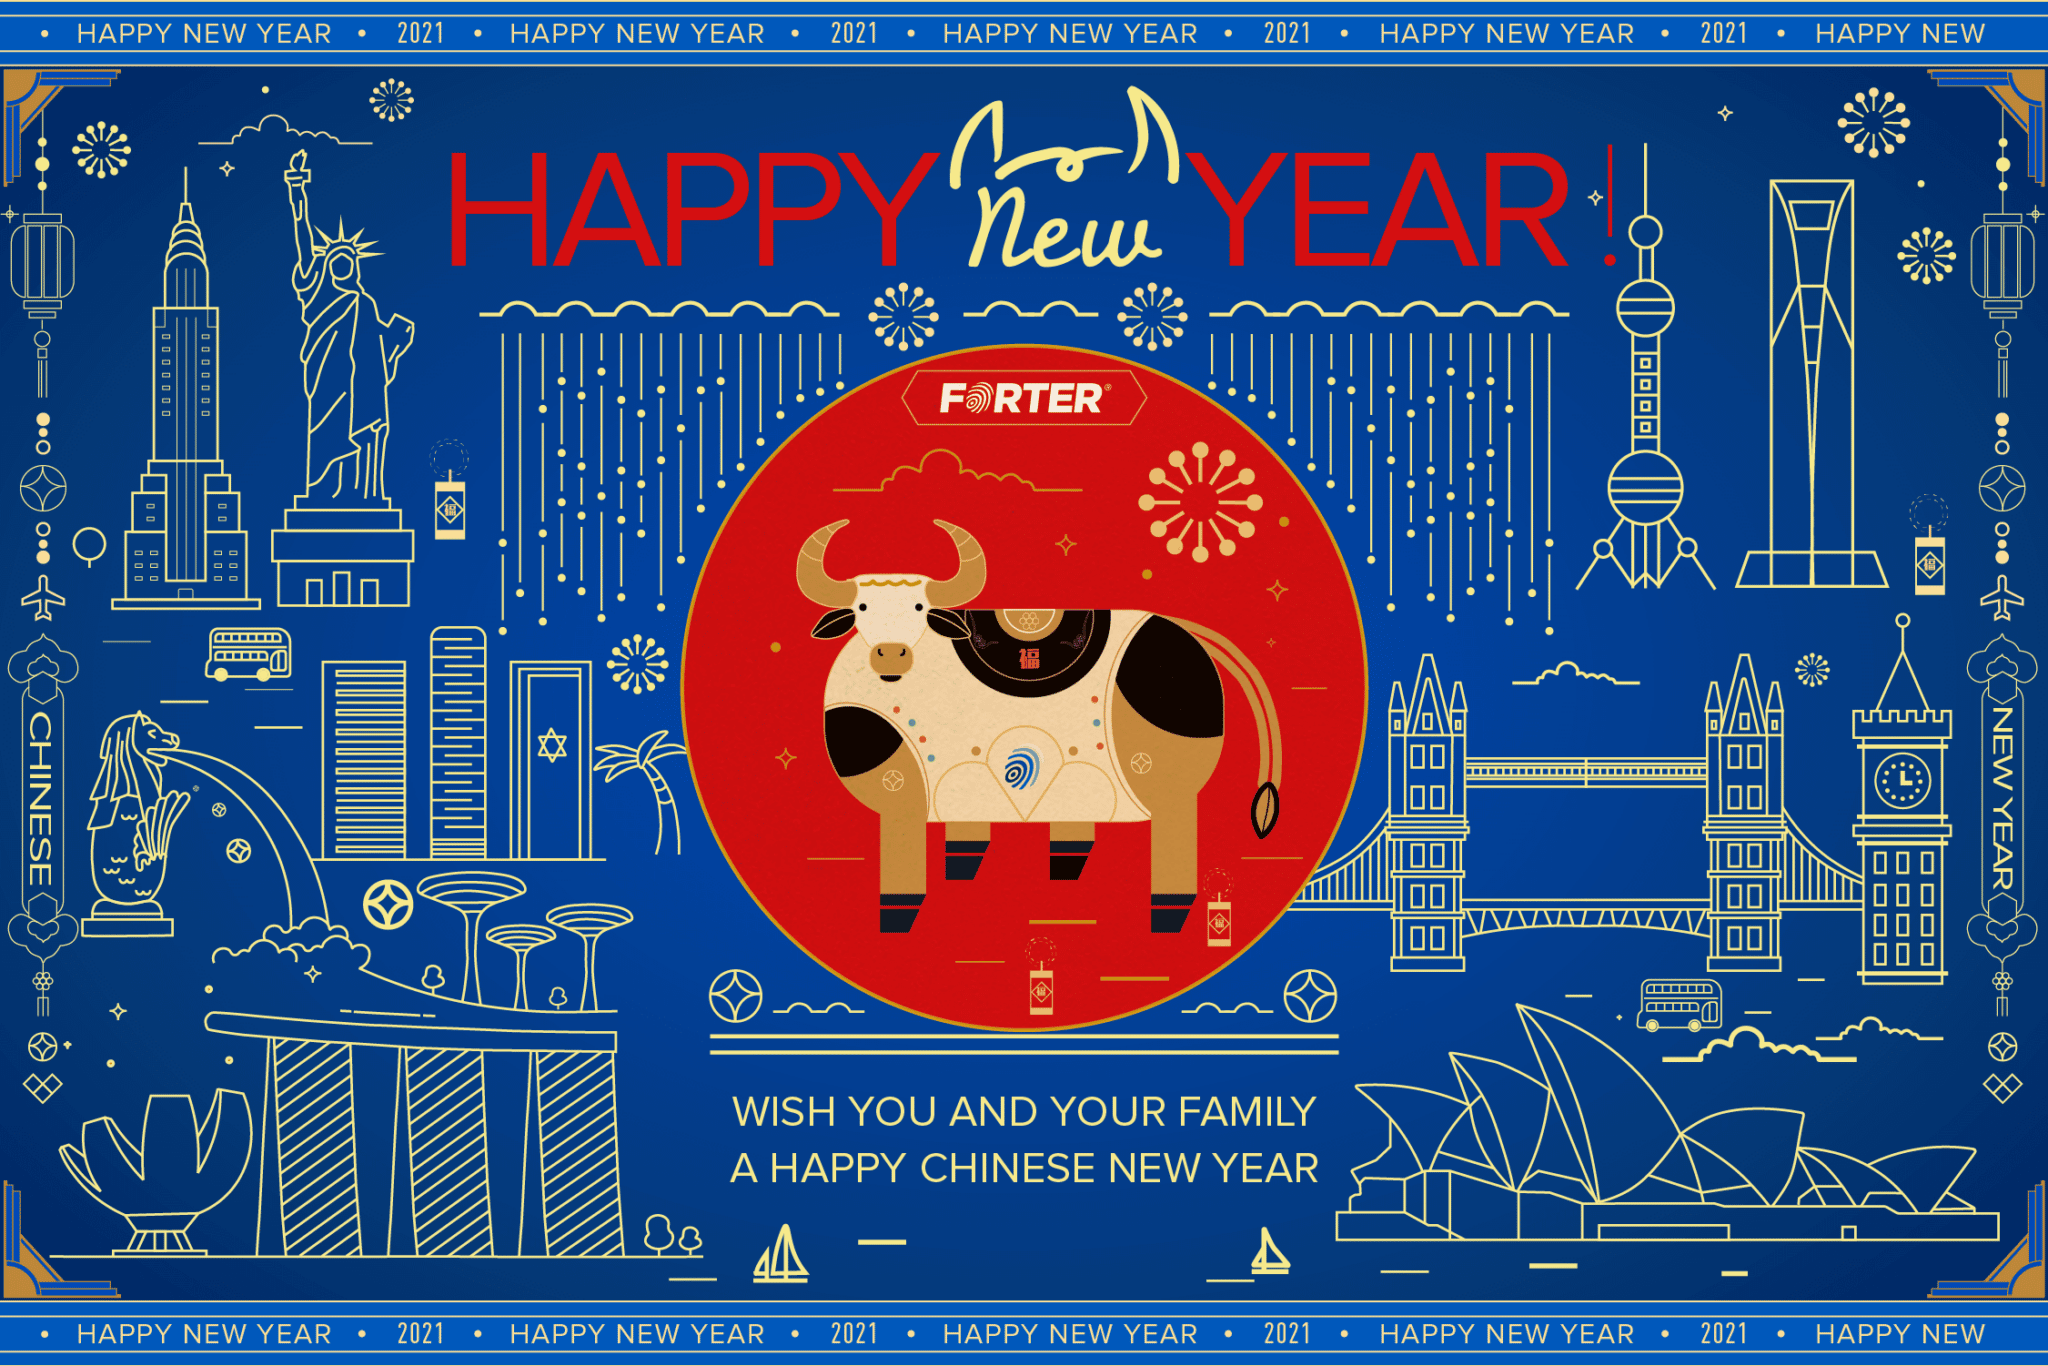 Greetings from the Forter Global Team: Happy Chinese New Year and Spring Festival!